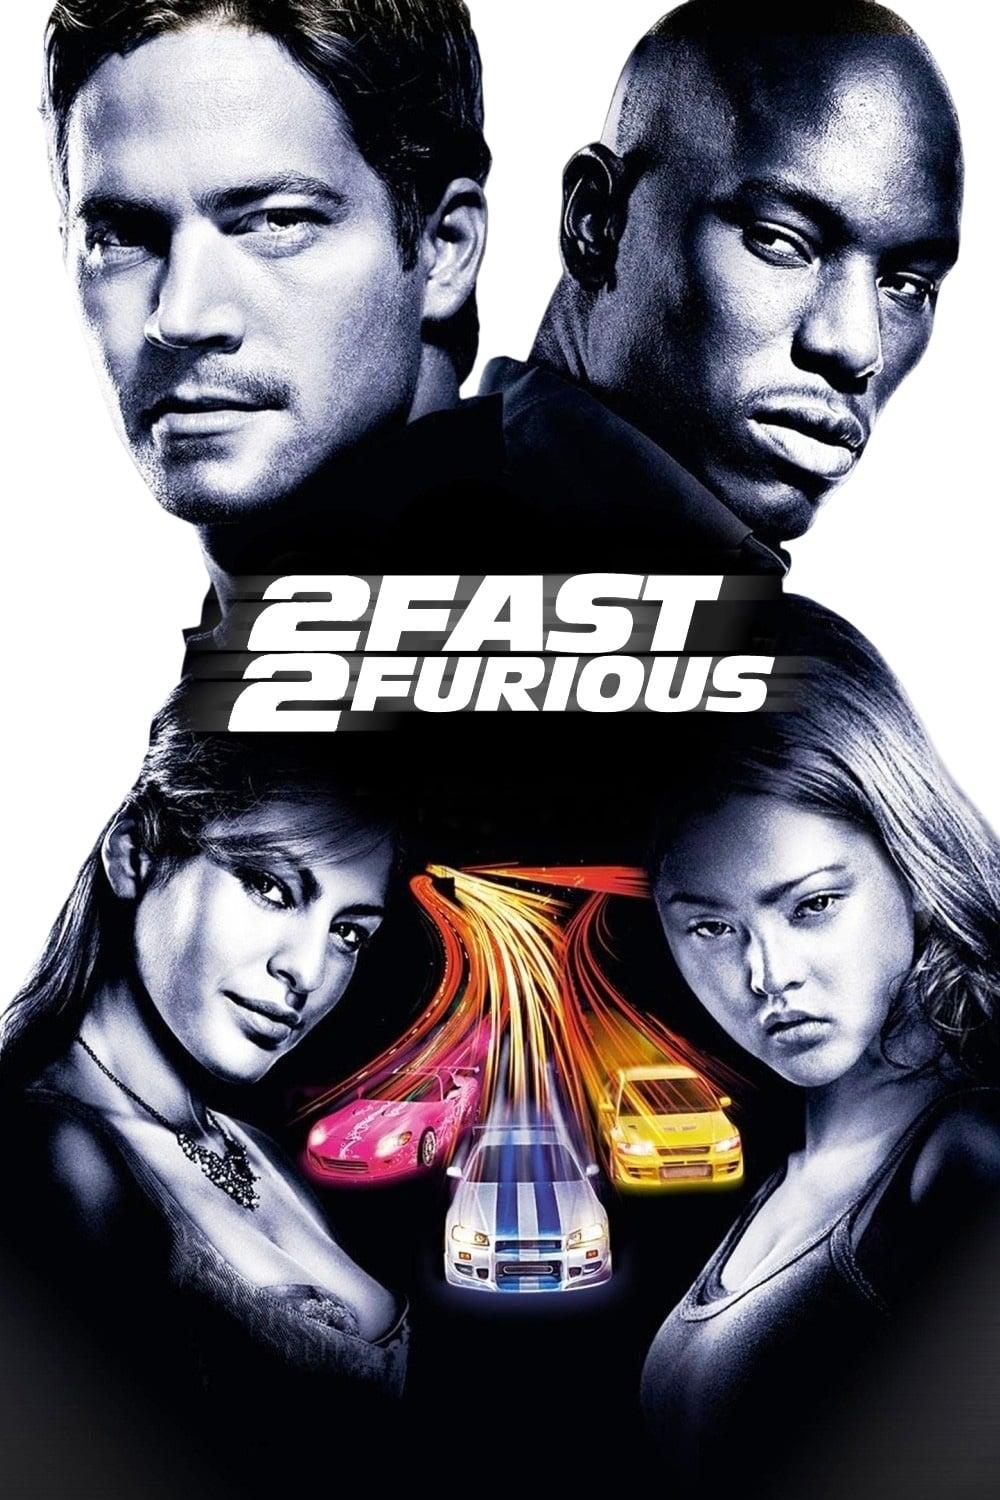 2 Fast 2 Furious poster